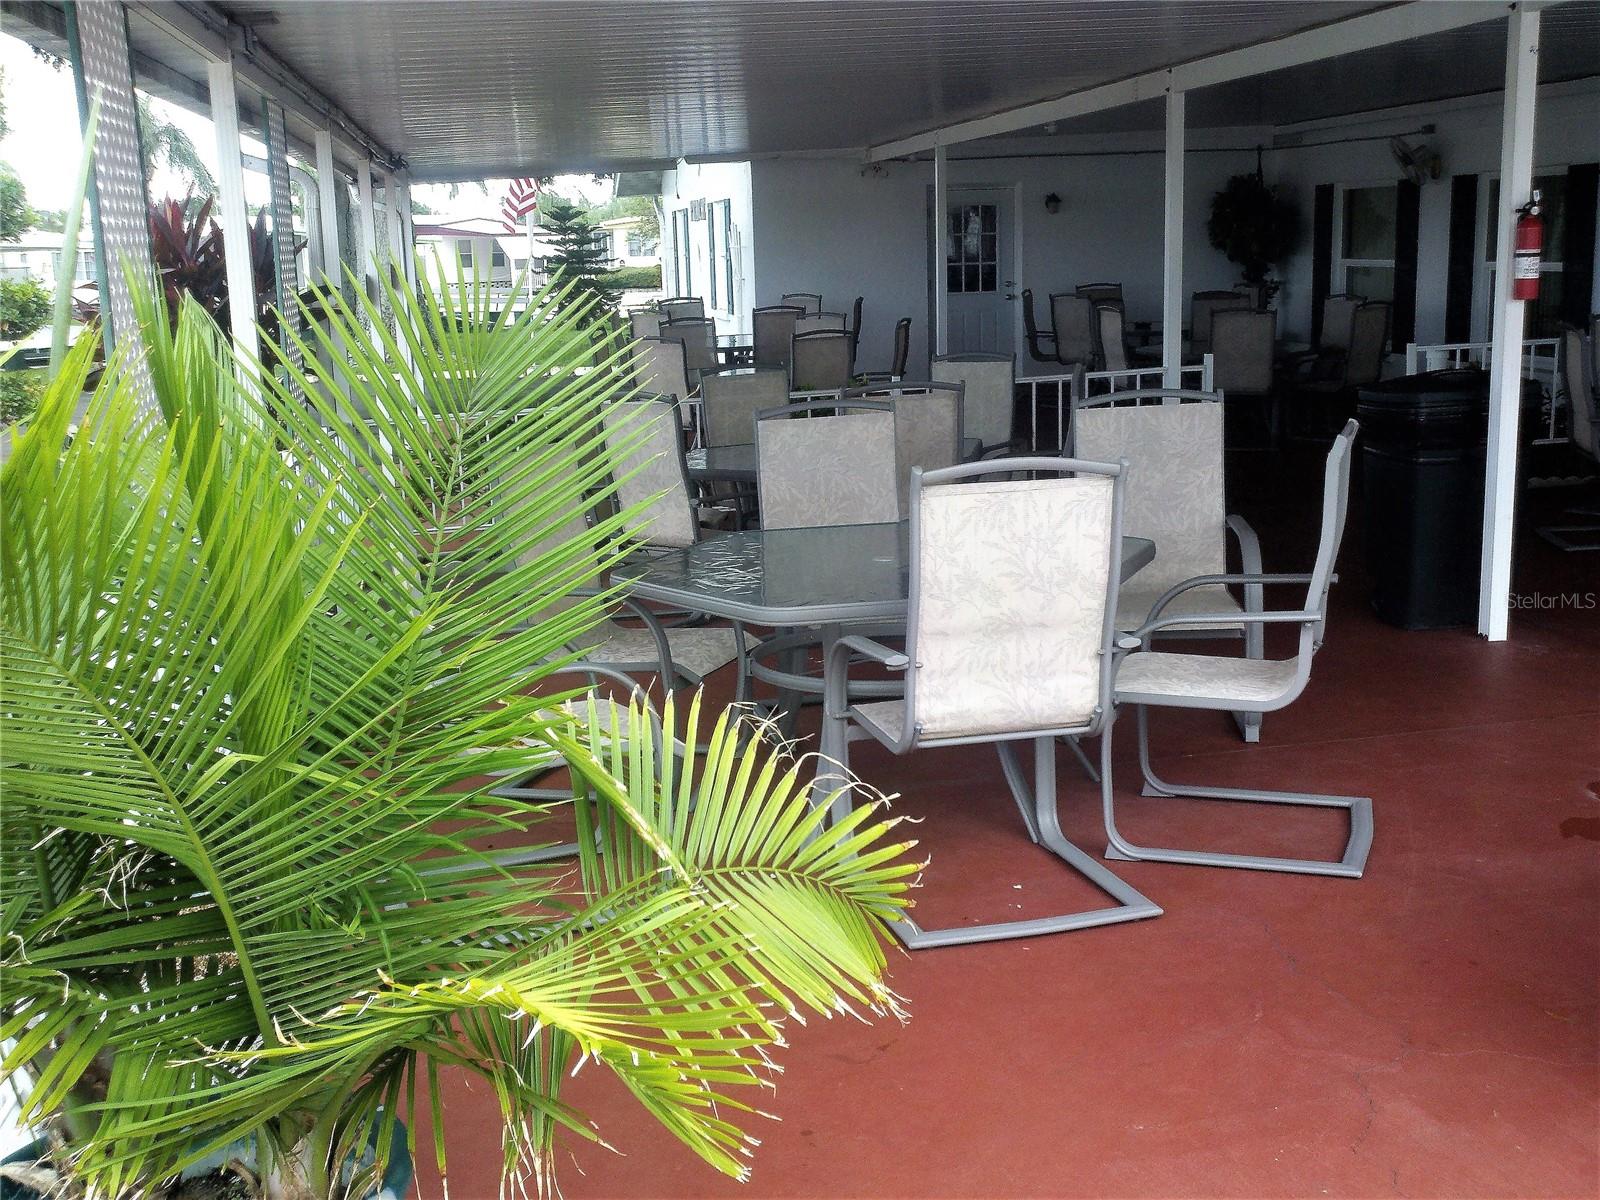 The covered patio is steps away from the pool area.